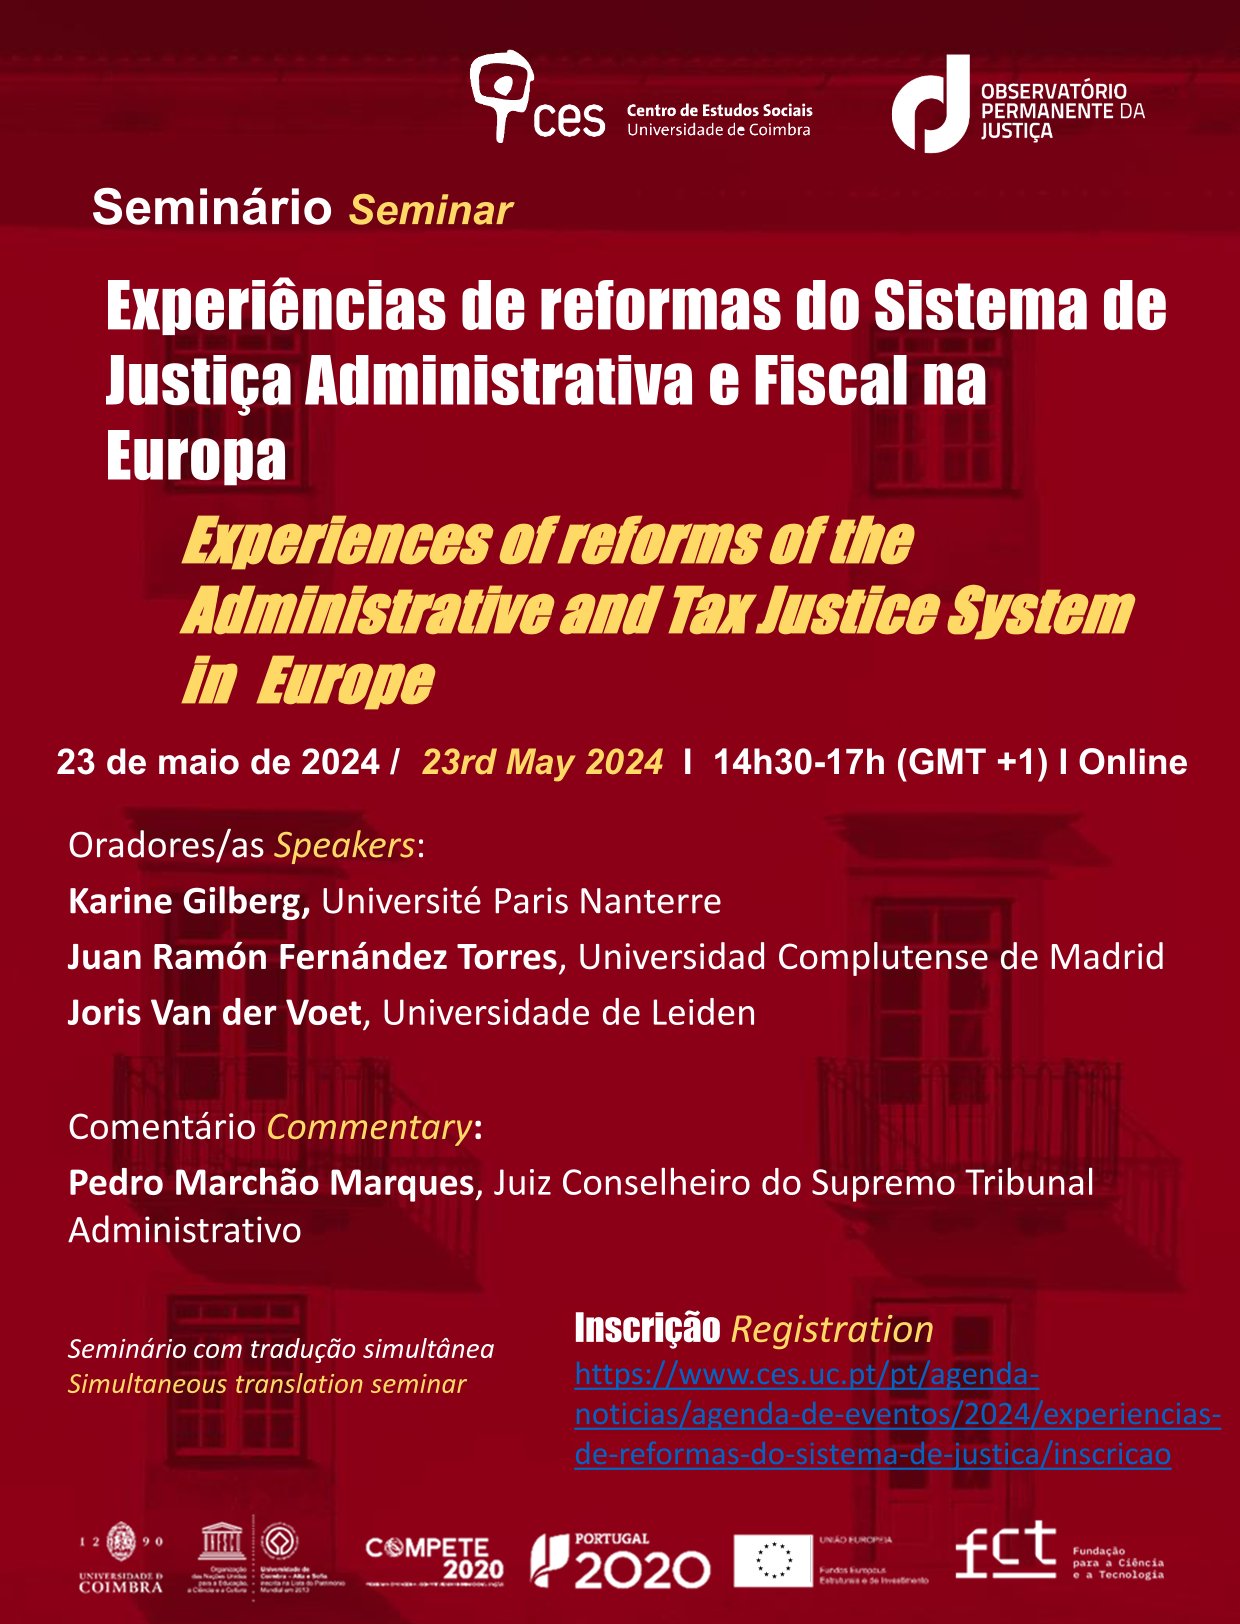 Experiences in reforming the administrative justice system in Europe <span id="edit_45855"><script>$(function() { $('#edit_45855').load( "/myces/user/editobj.php?tipo=evento&id=45855" ); });</script></span>